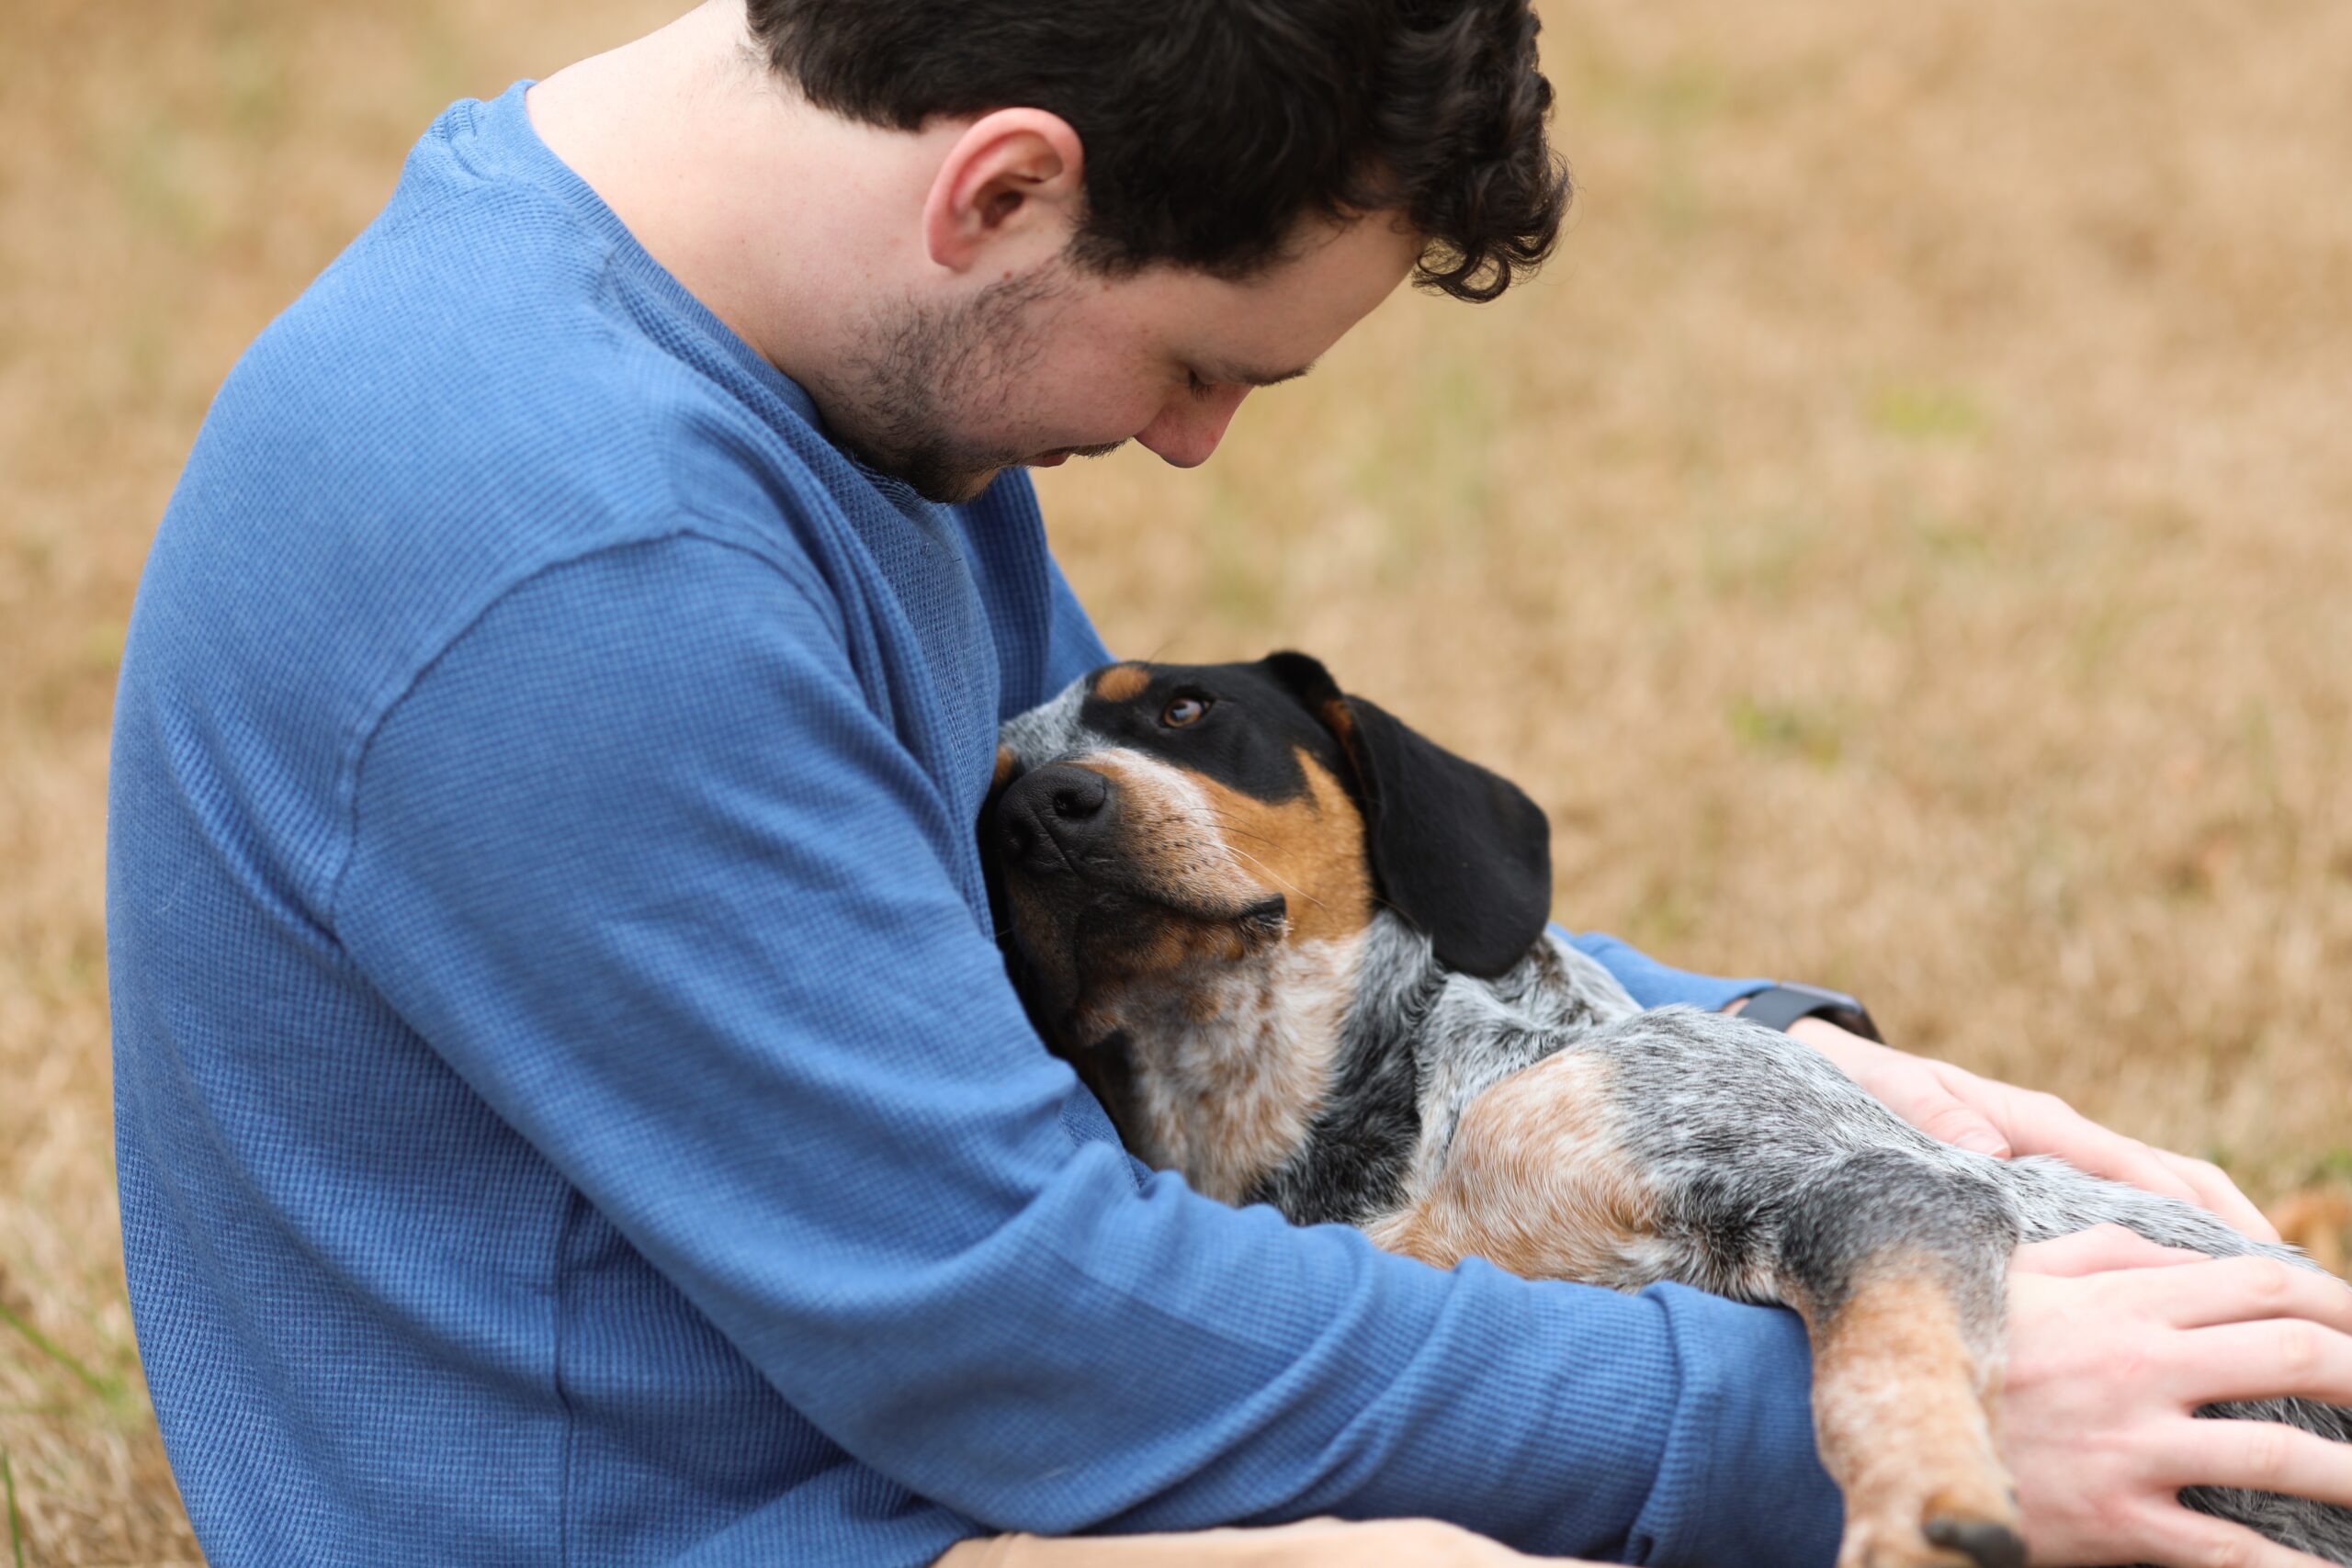 Does My Dog Love Me? 10 Ways to Know If Your Dog Loves You